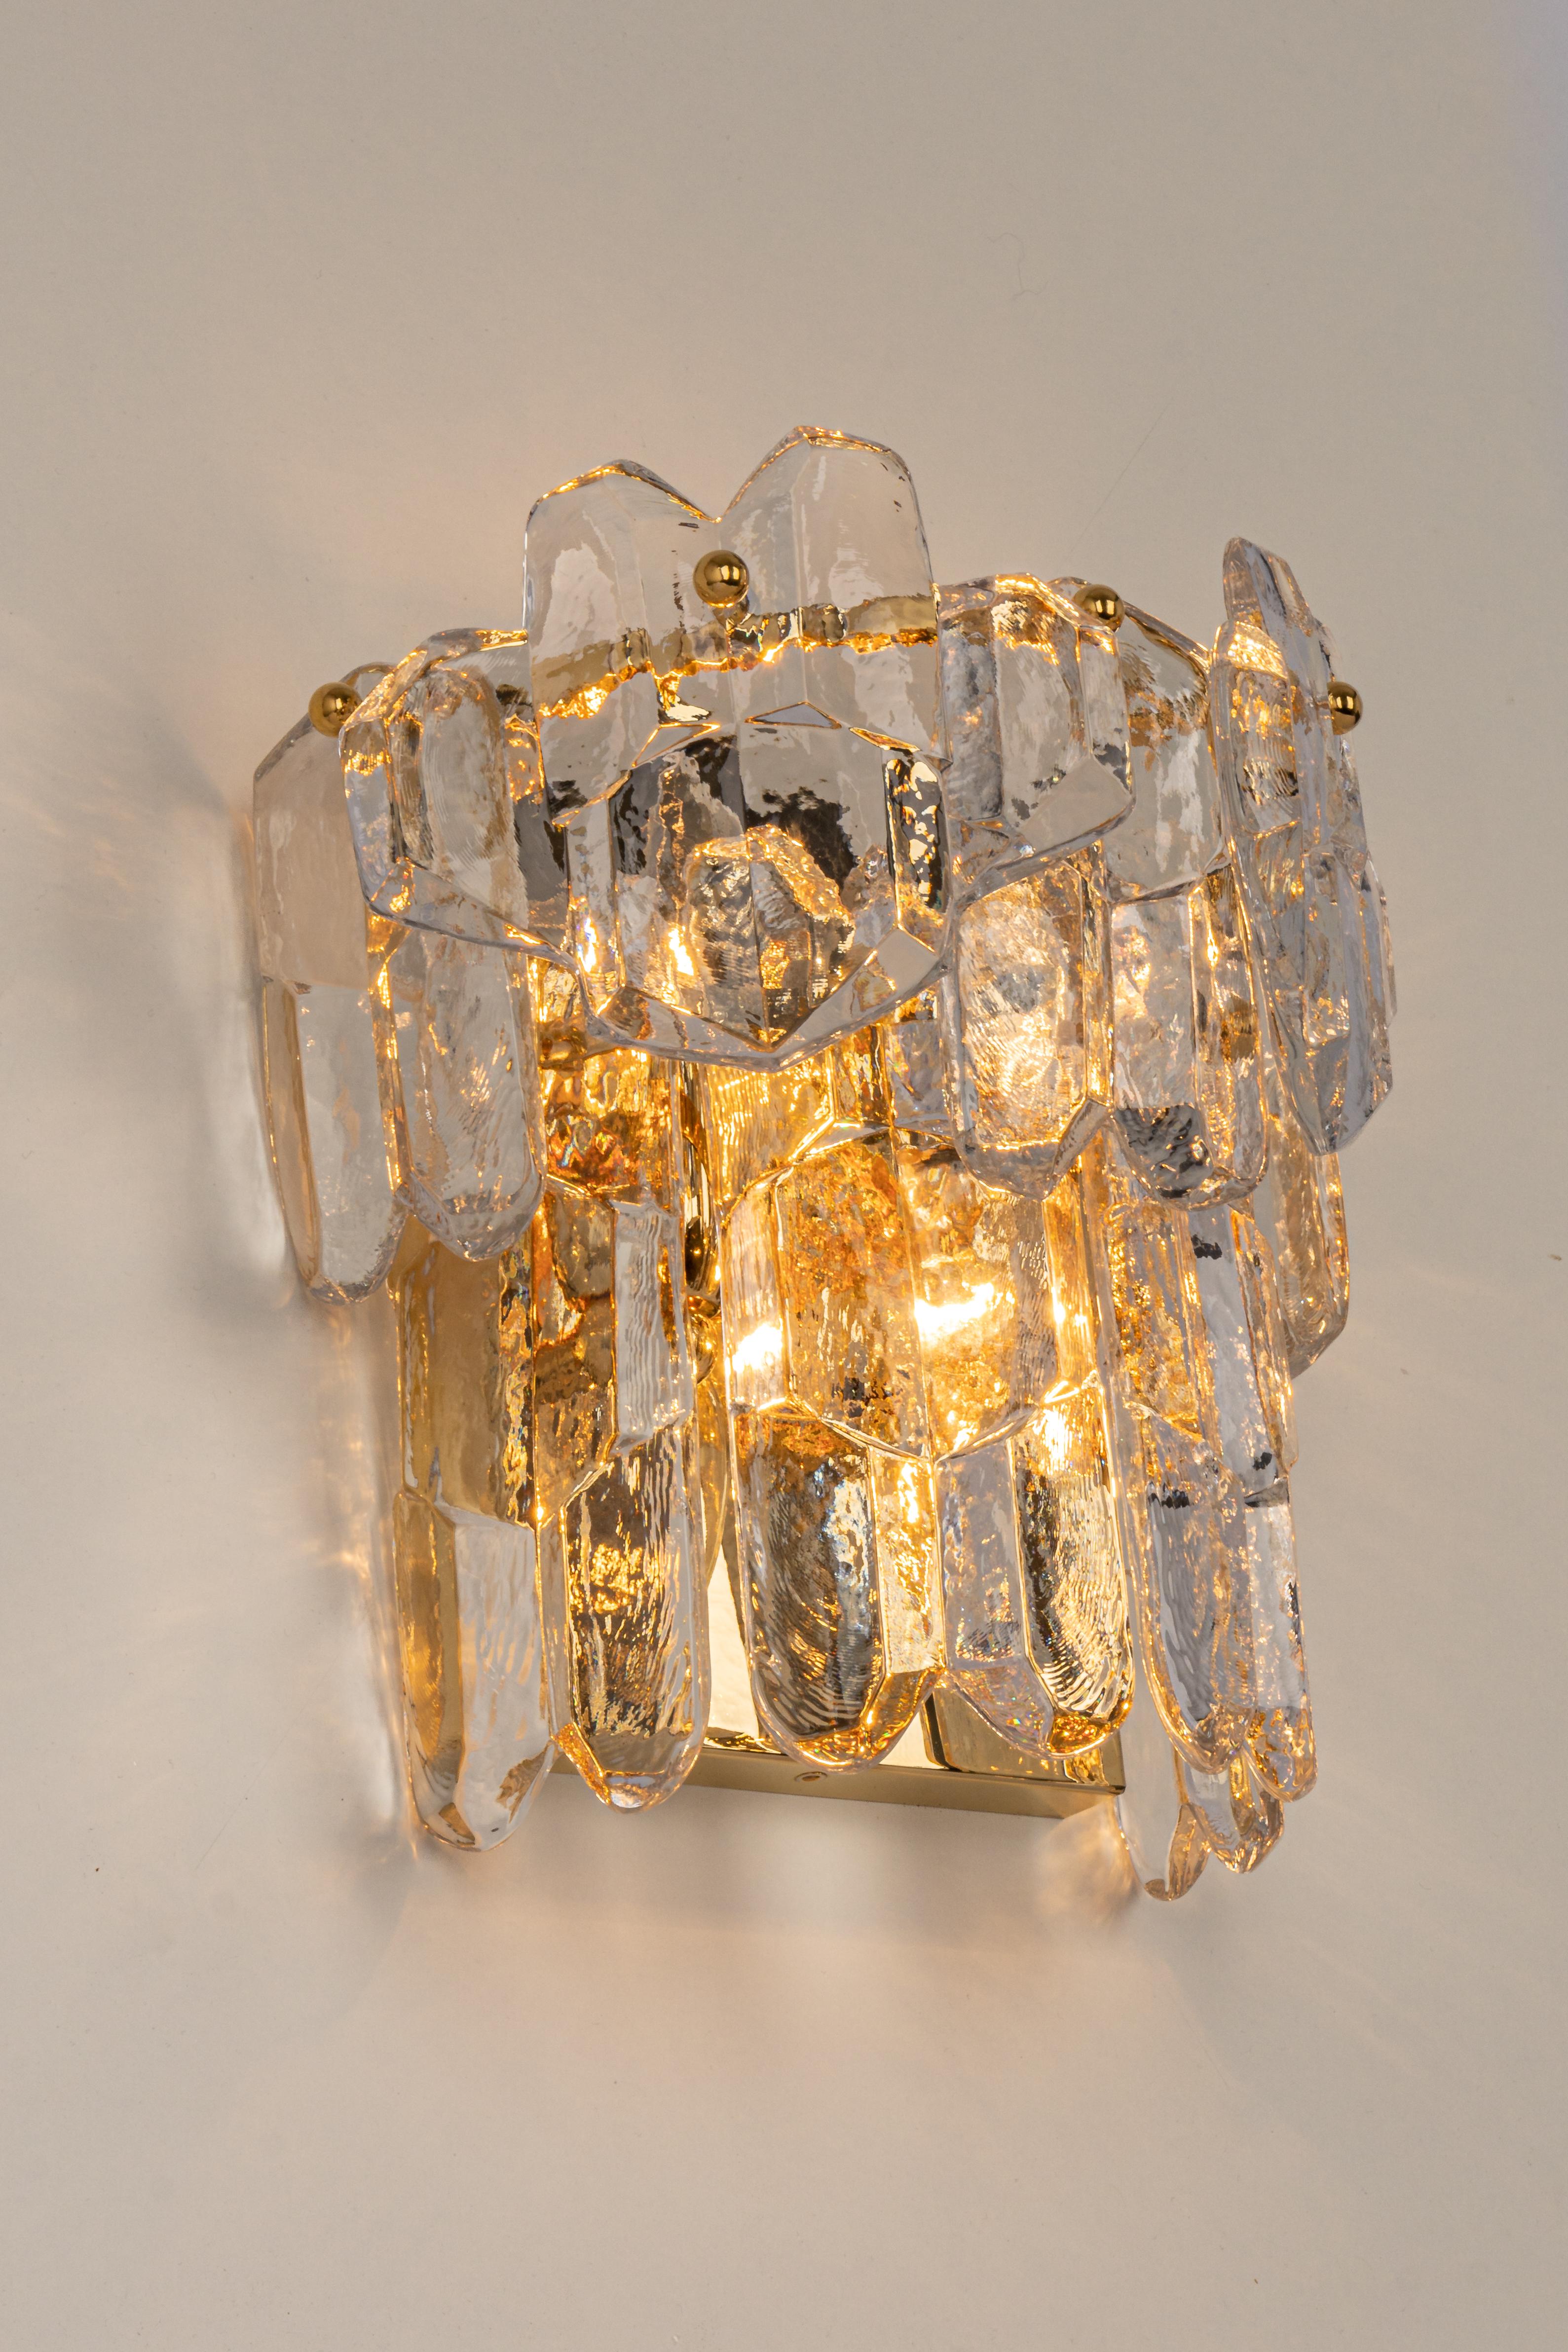 1 of 2 Pairs of Large Kalmar Sconces Wall Lights 'Palazzo', Austria, 1970s For Sale 2